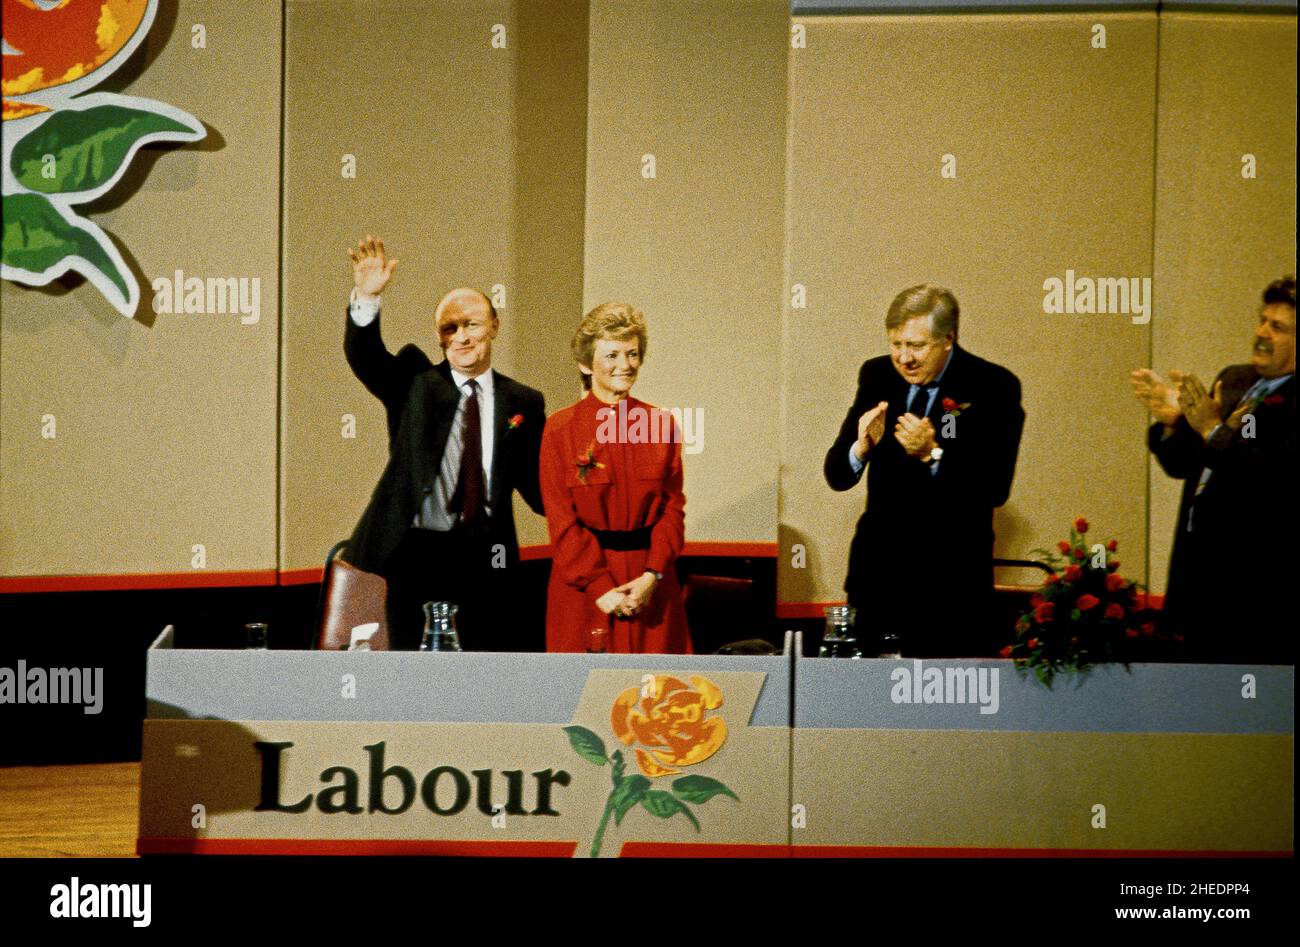 Labour party leader Neil Kinnock with his wife Glenys and Roy Hattersley. Colin Welland on the right at the Labour Party Conference Stock Photo